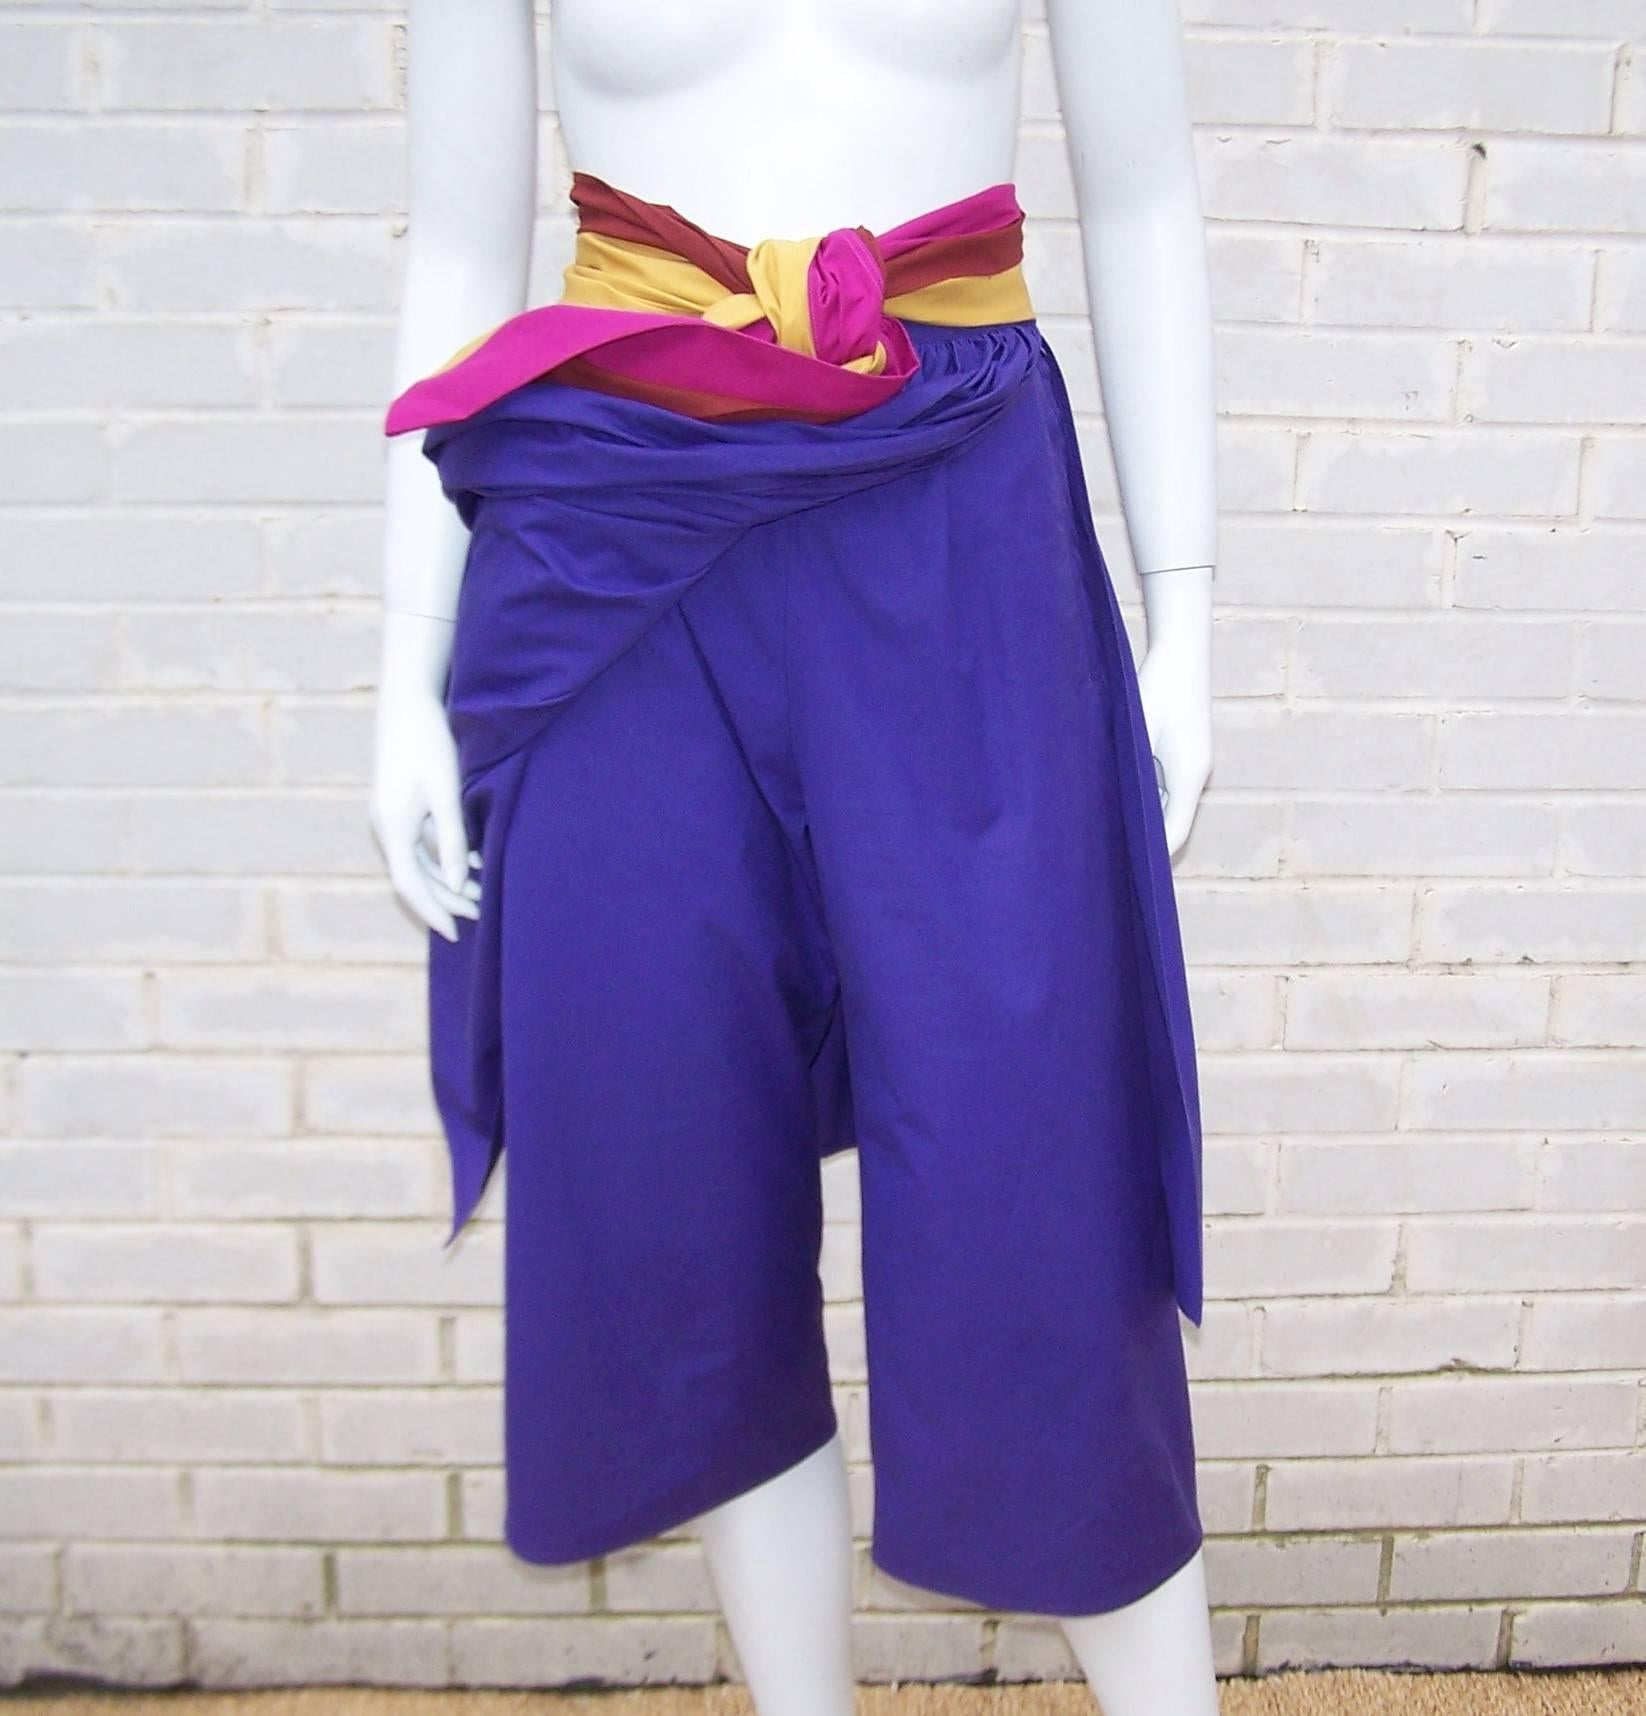 Colorful 1970's Gucci Cotton Culottes With Skirted Overlay 2